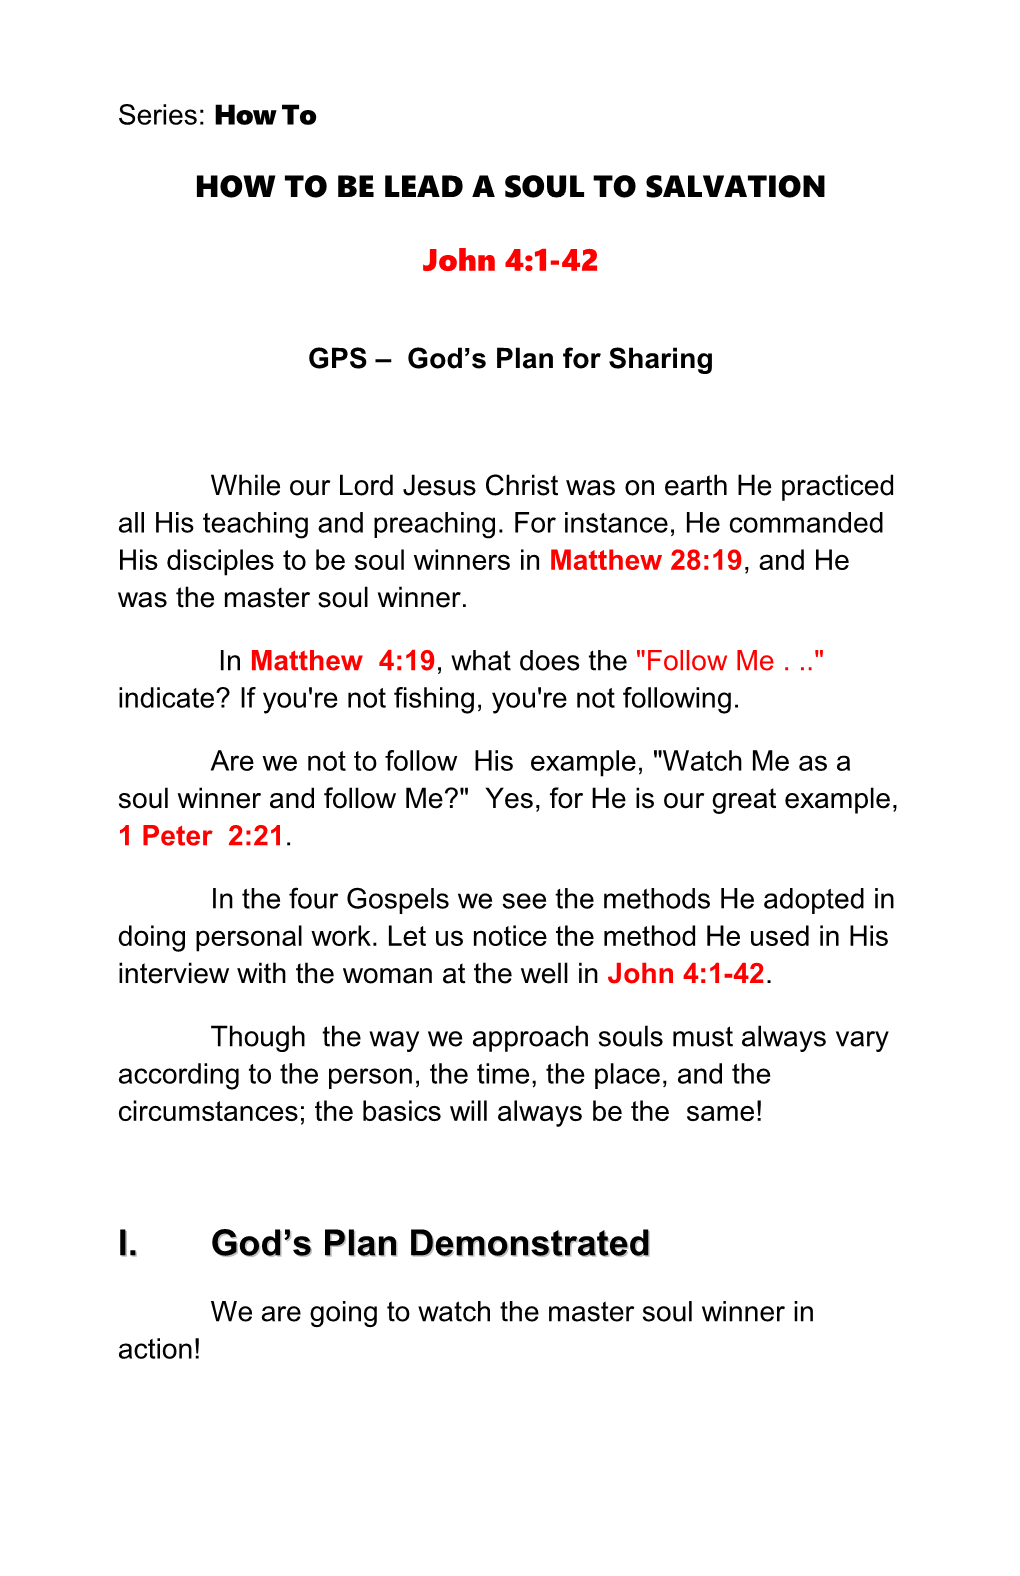 GPS God S Plan for Sharing